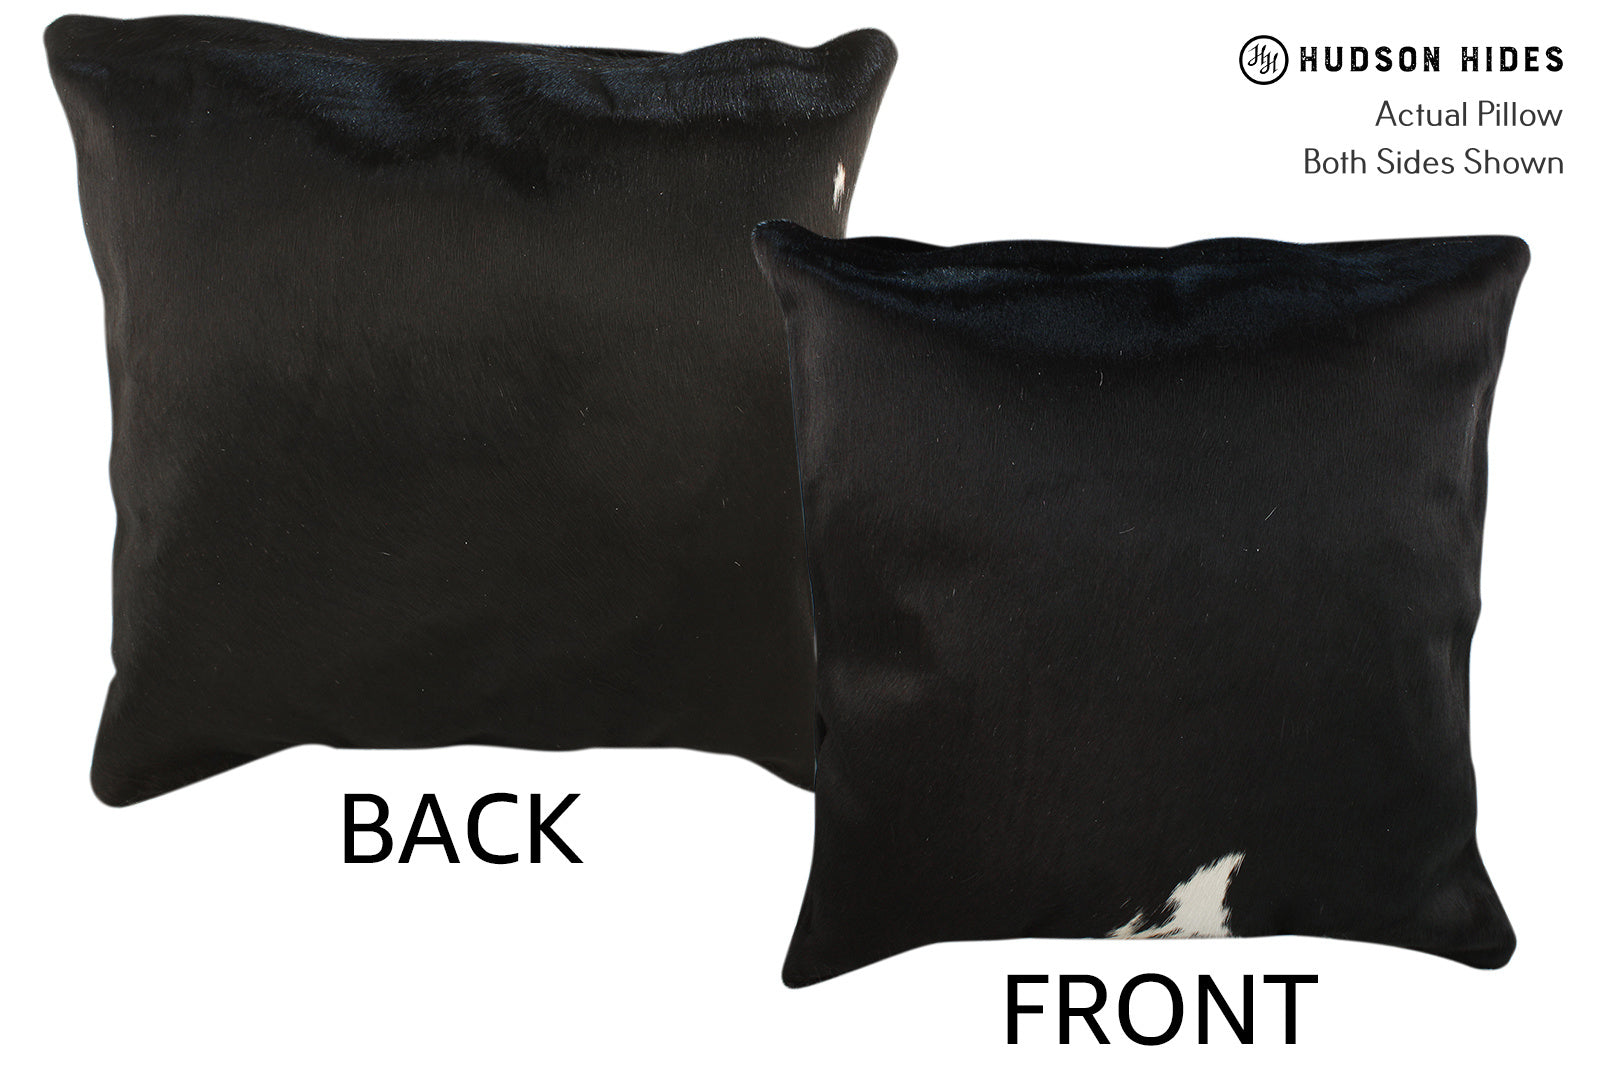 Black and White Cowhide Pillow #19560